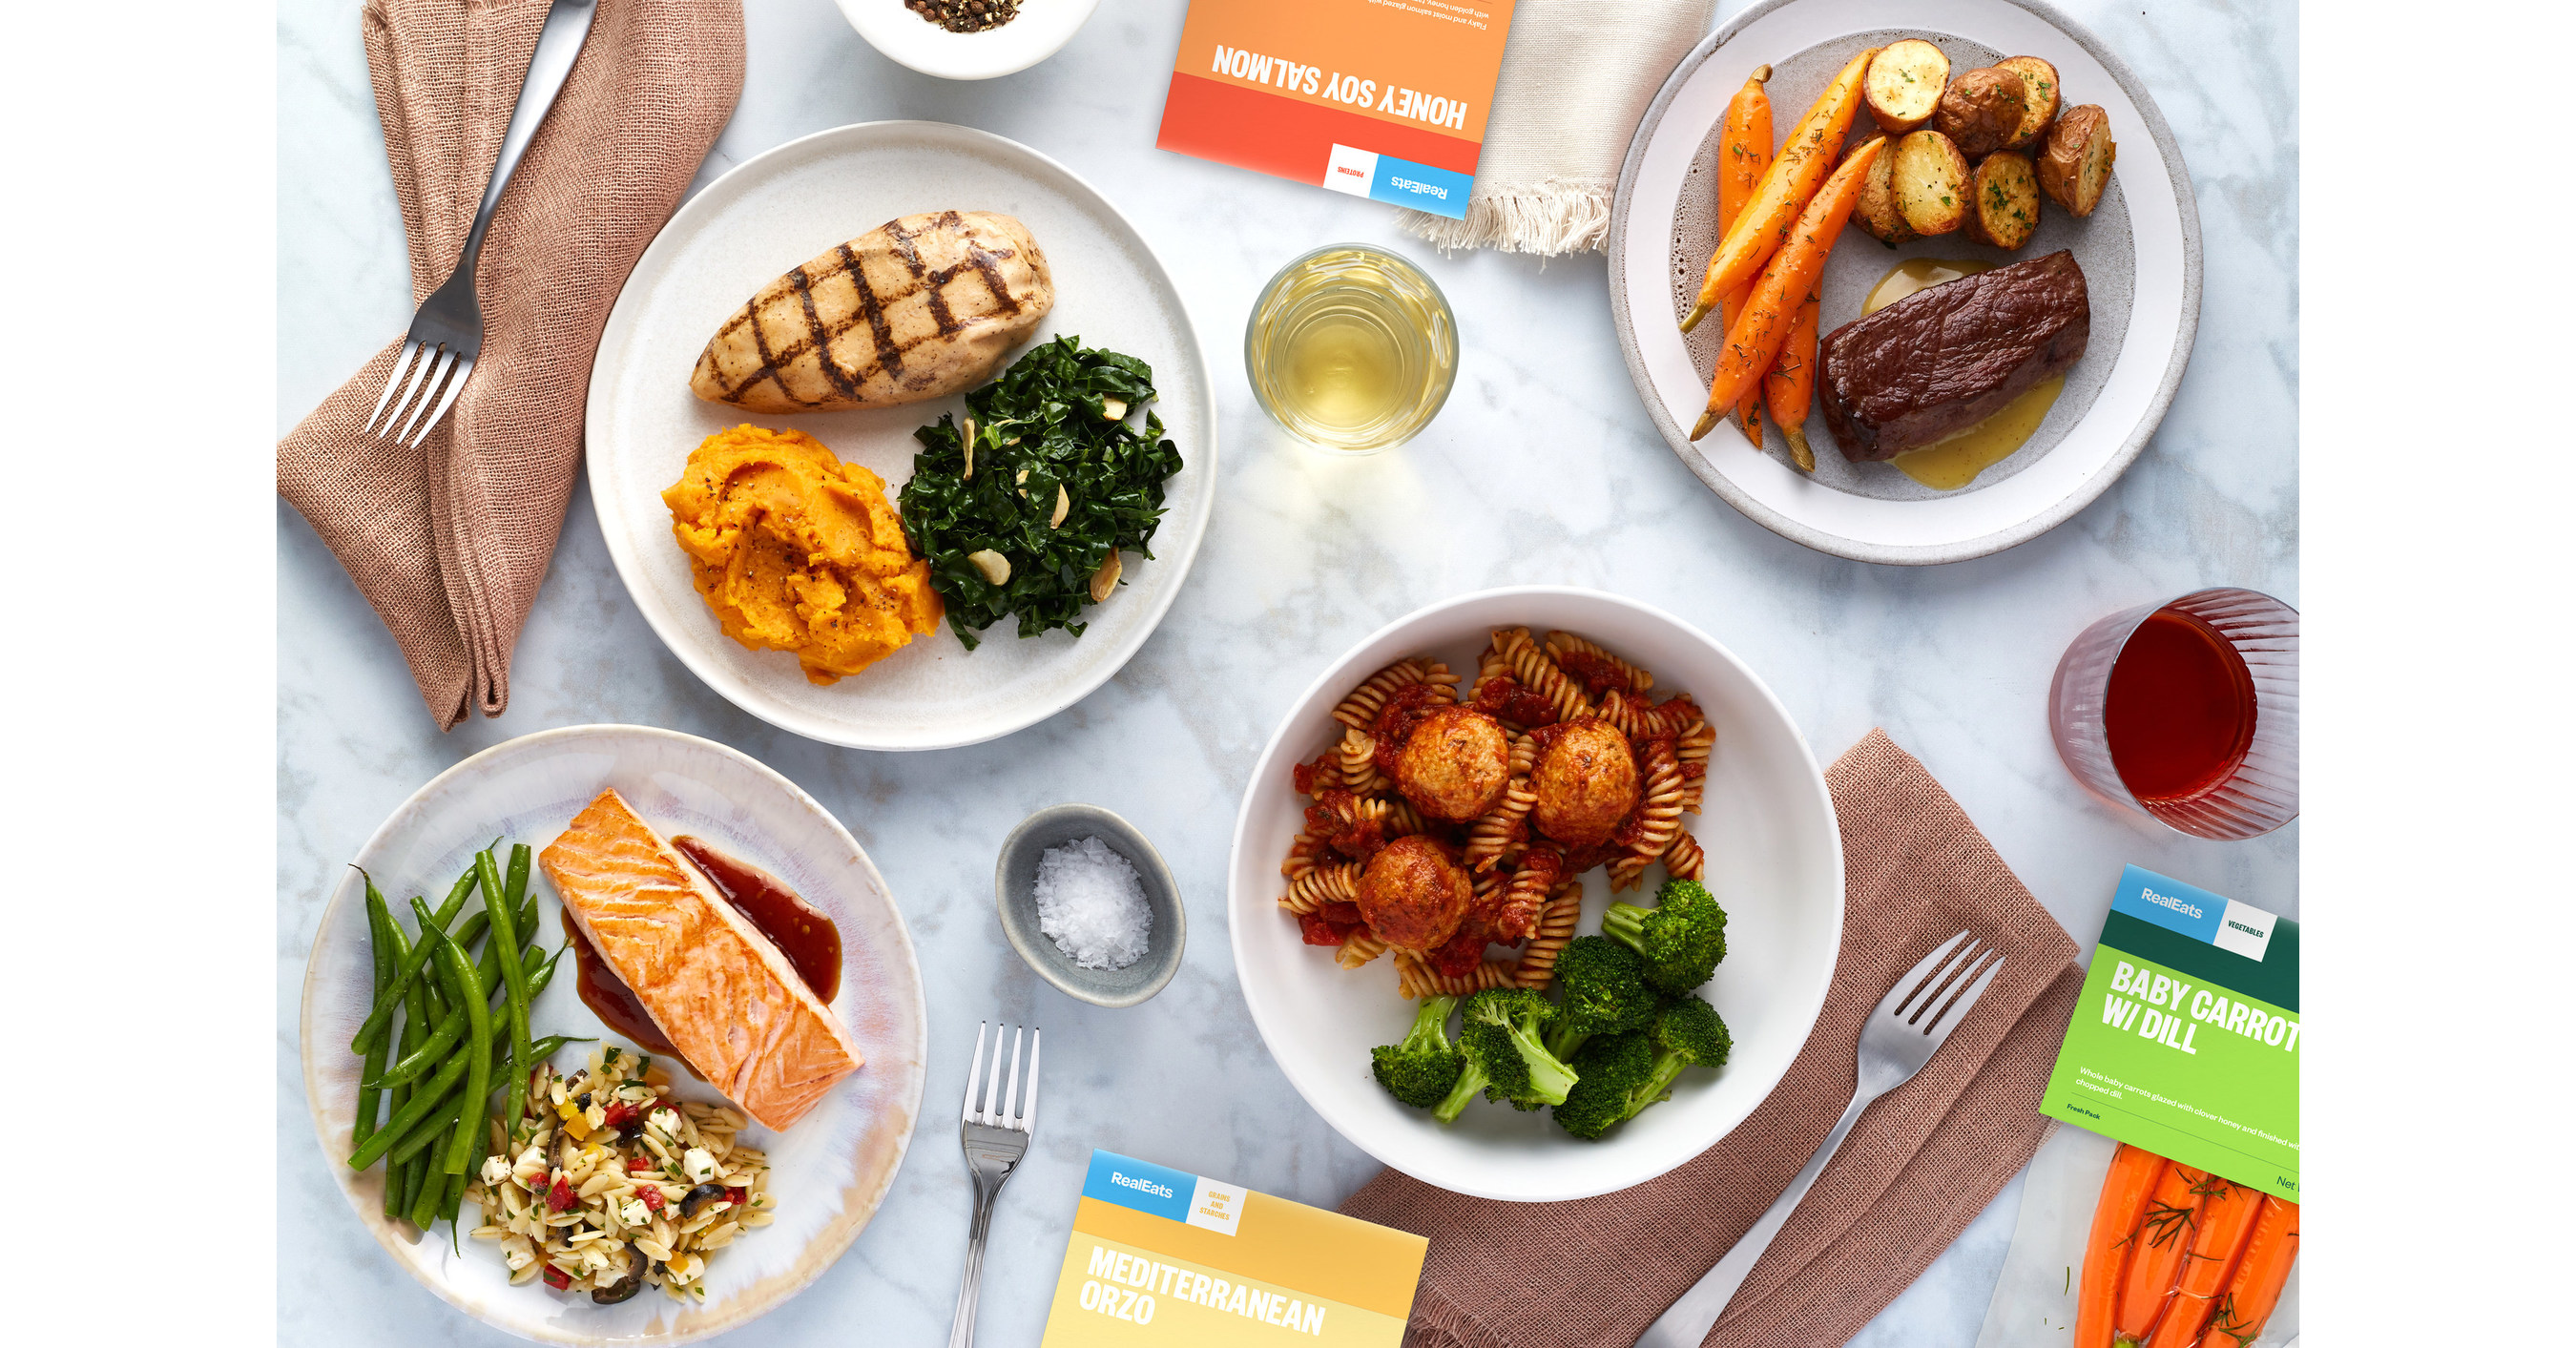 Real Good Foods Announces Launch of Two New Global Entrées